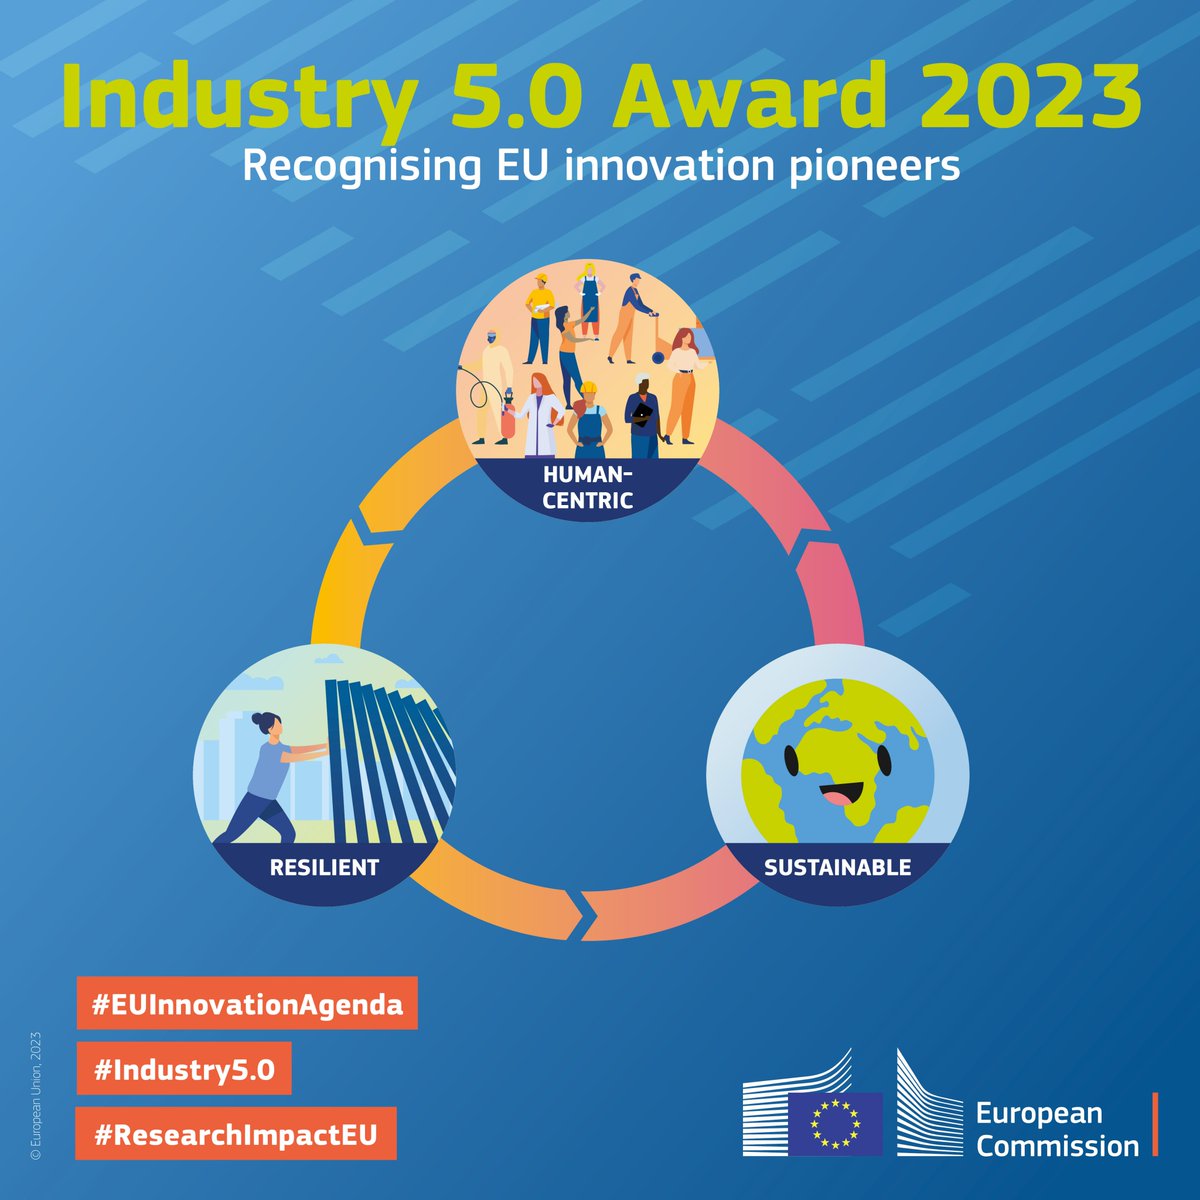 Last chance to apply for the Industry 5.0 Awards ⏰ We're looking for projects whose results make Europe more human-centric, resilient & inclusive 🔬 Apply if you work for or with an EU-funded project! Deadline is 15 September: europa.eu/!n9Qn7T #ResearchImpactEU